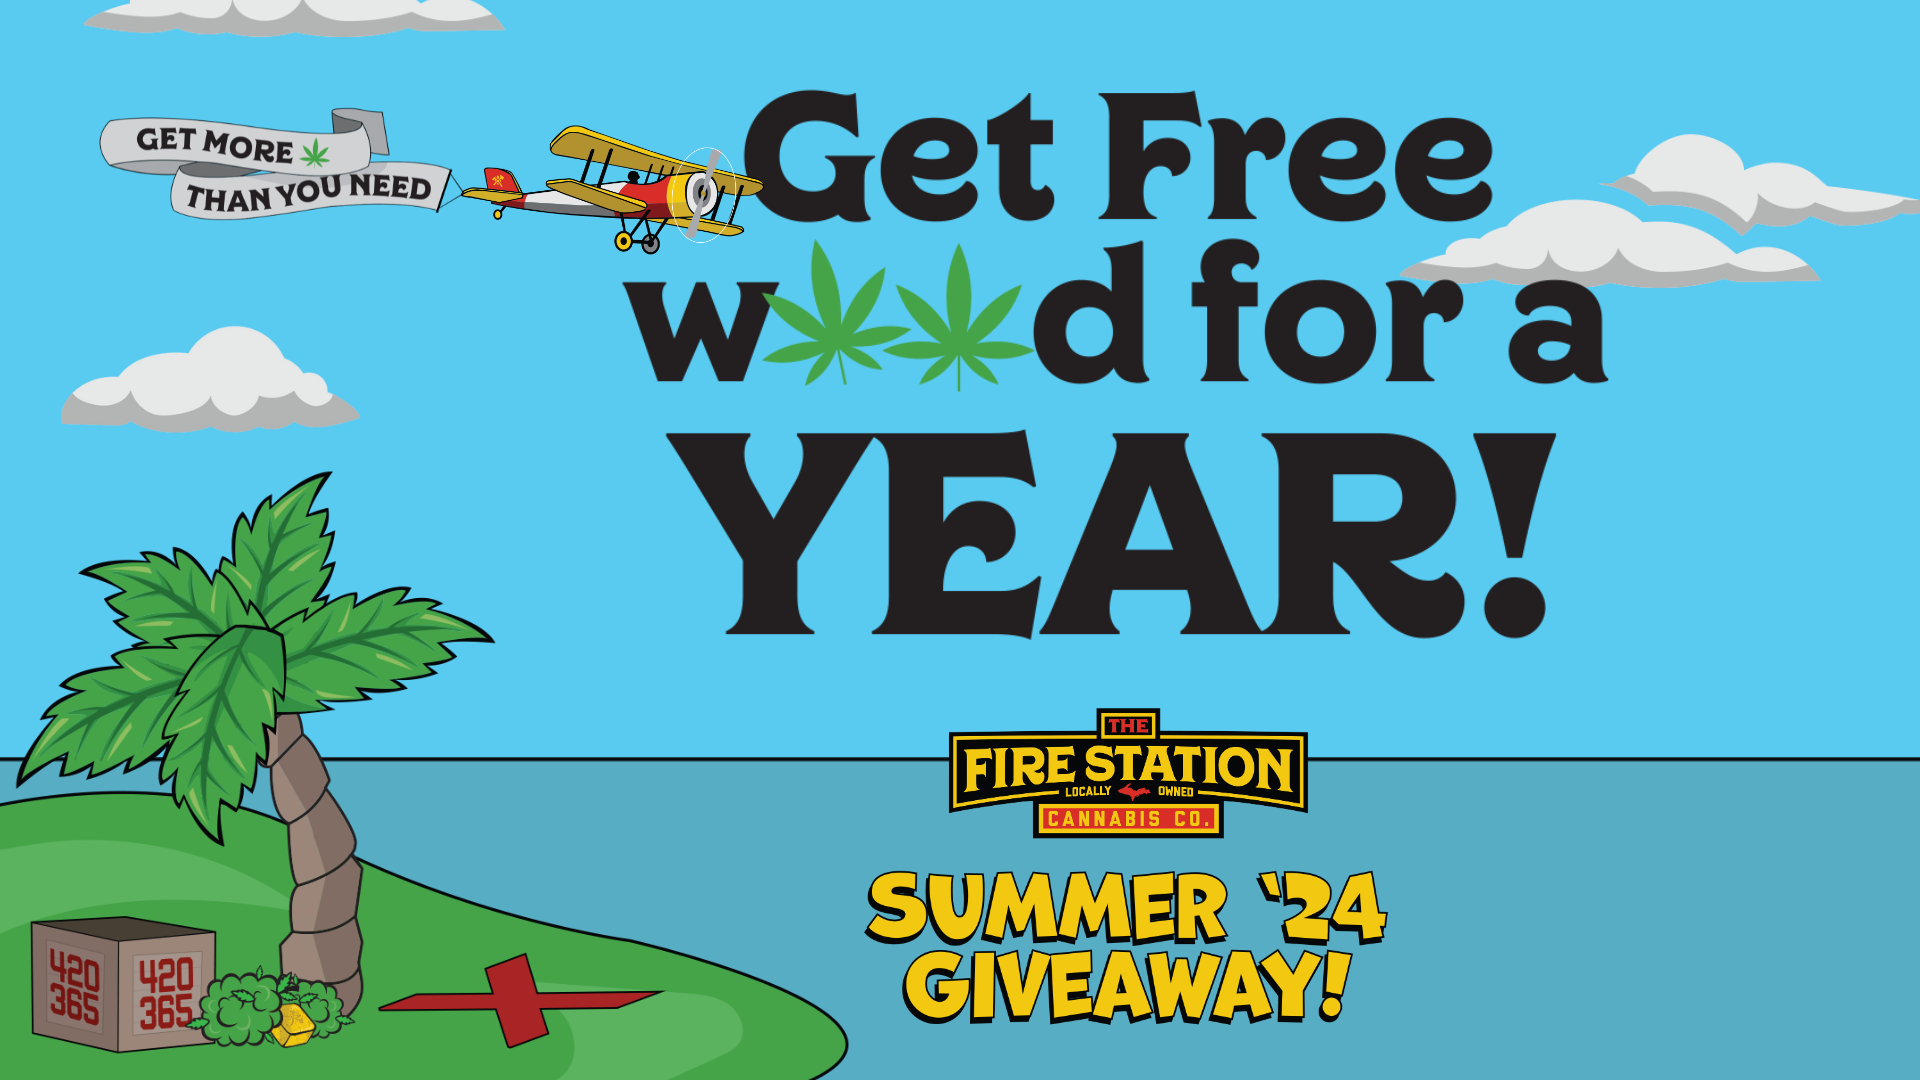 Enter The Fire Station's summer giveaway for a chance to win free weed for a year.